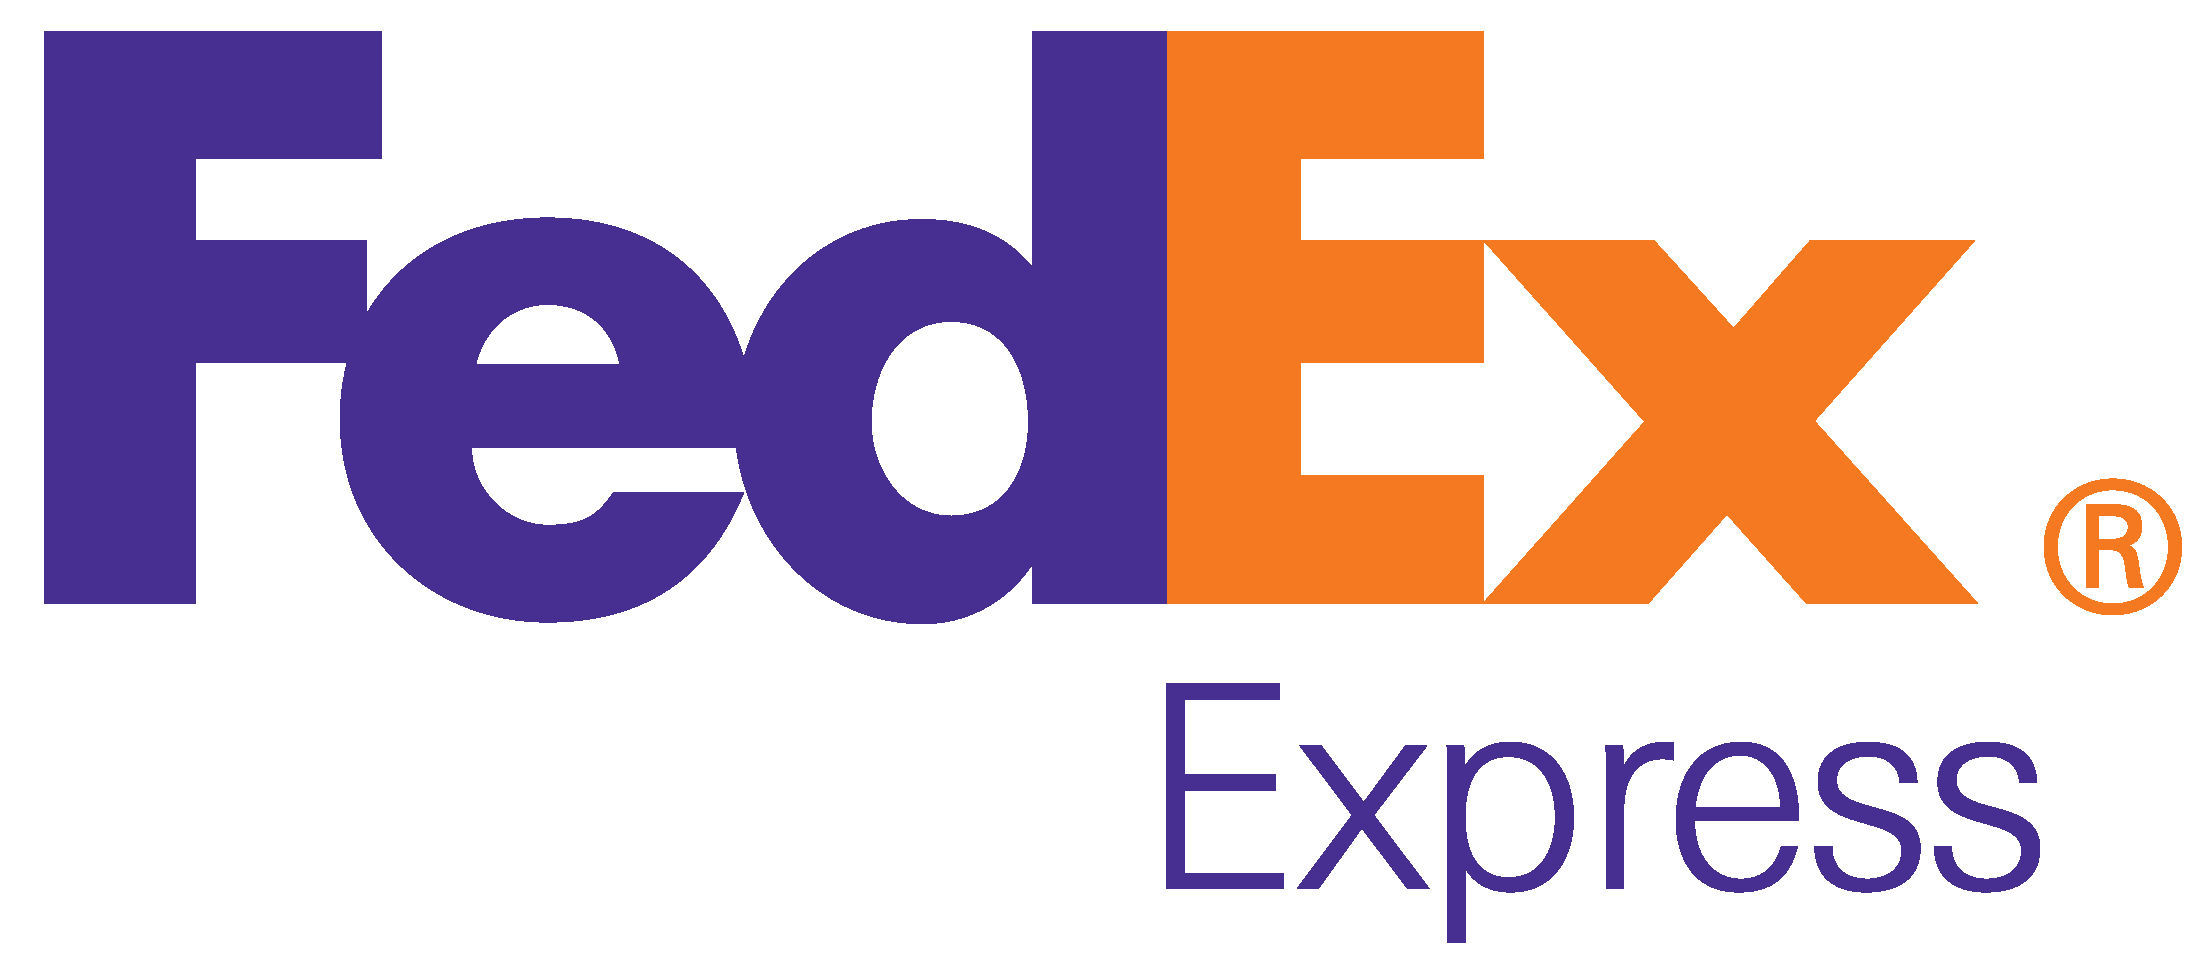 Federal Express Old Logo - Fed Ex not only upgraded big time in comparison to their old logo